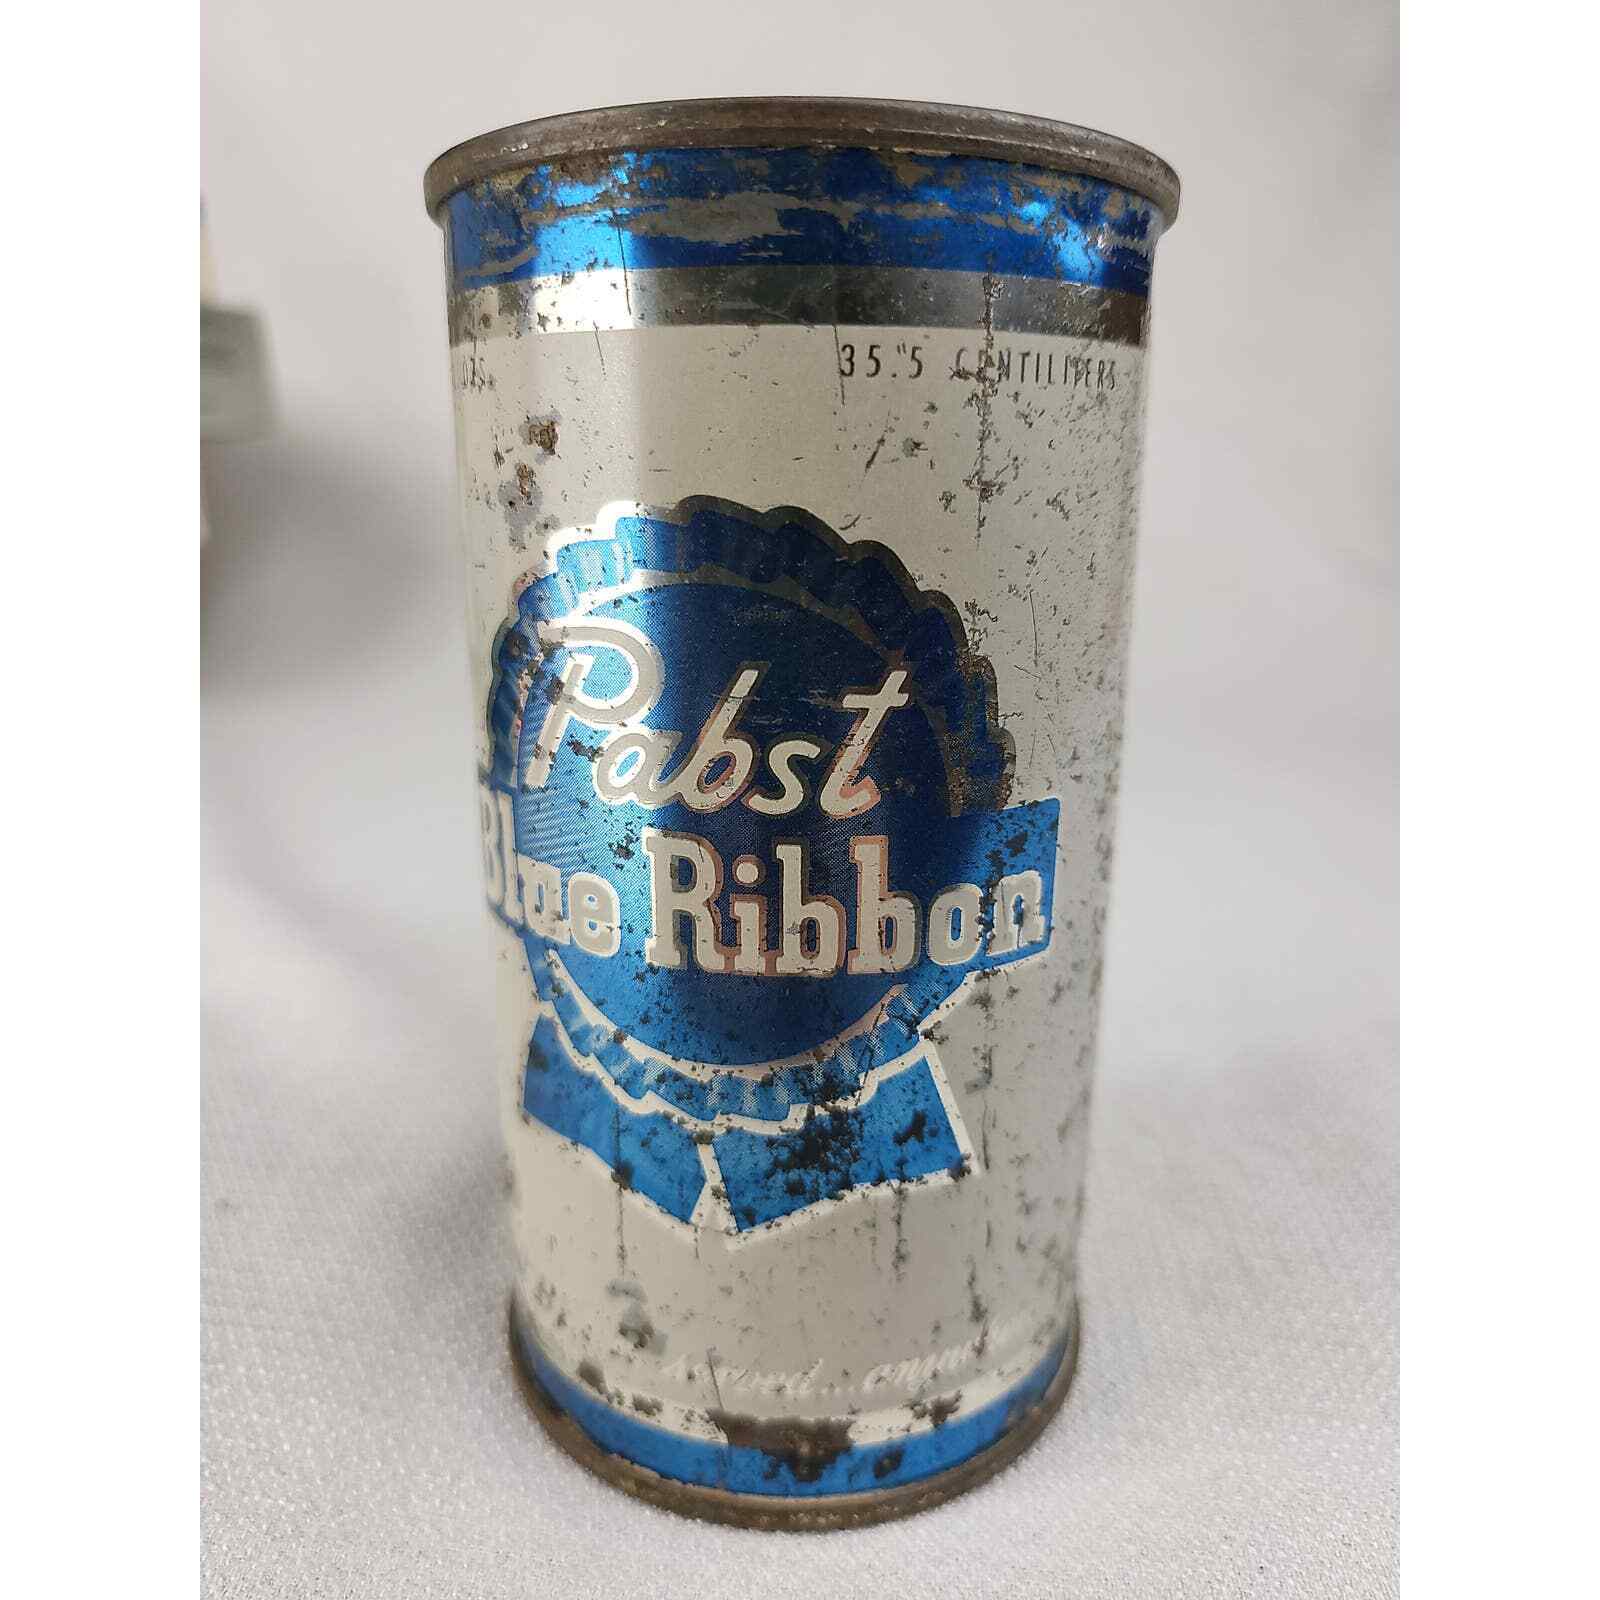 Pabst Blue Ribbon Milwaukee WIS Flat Top Beer Can EMPTY